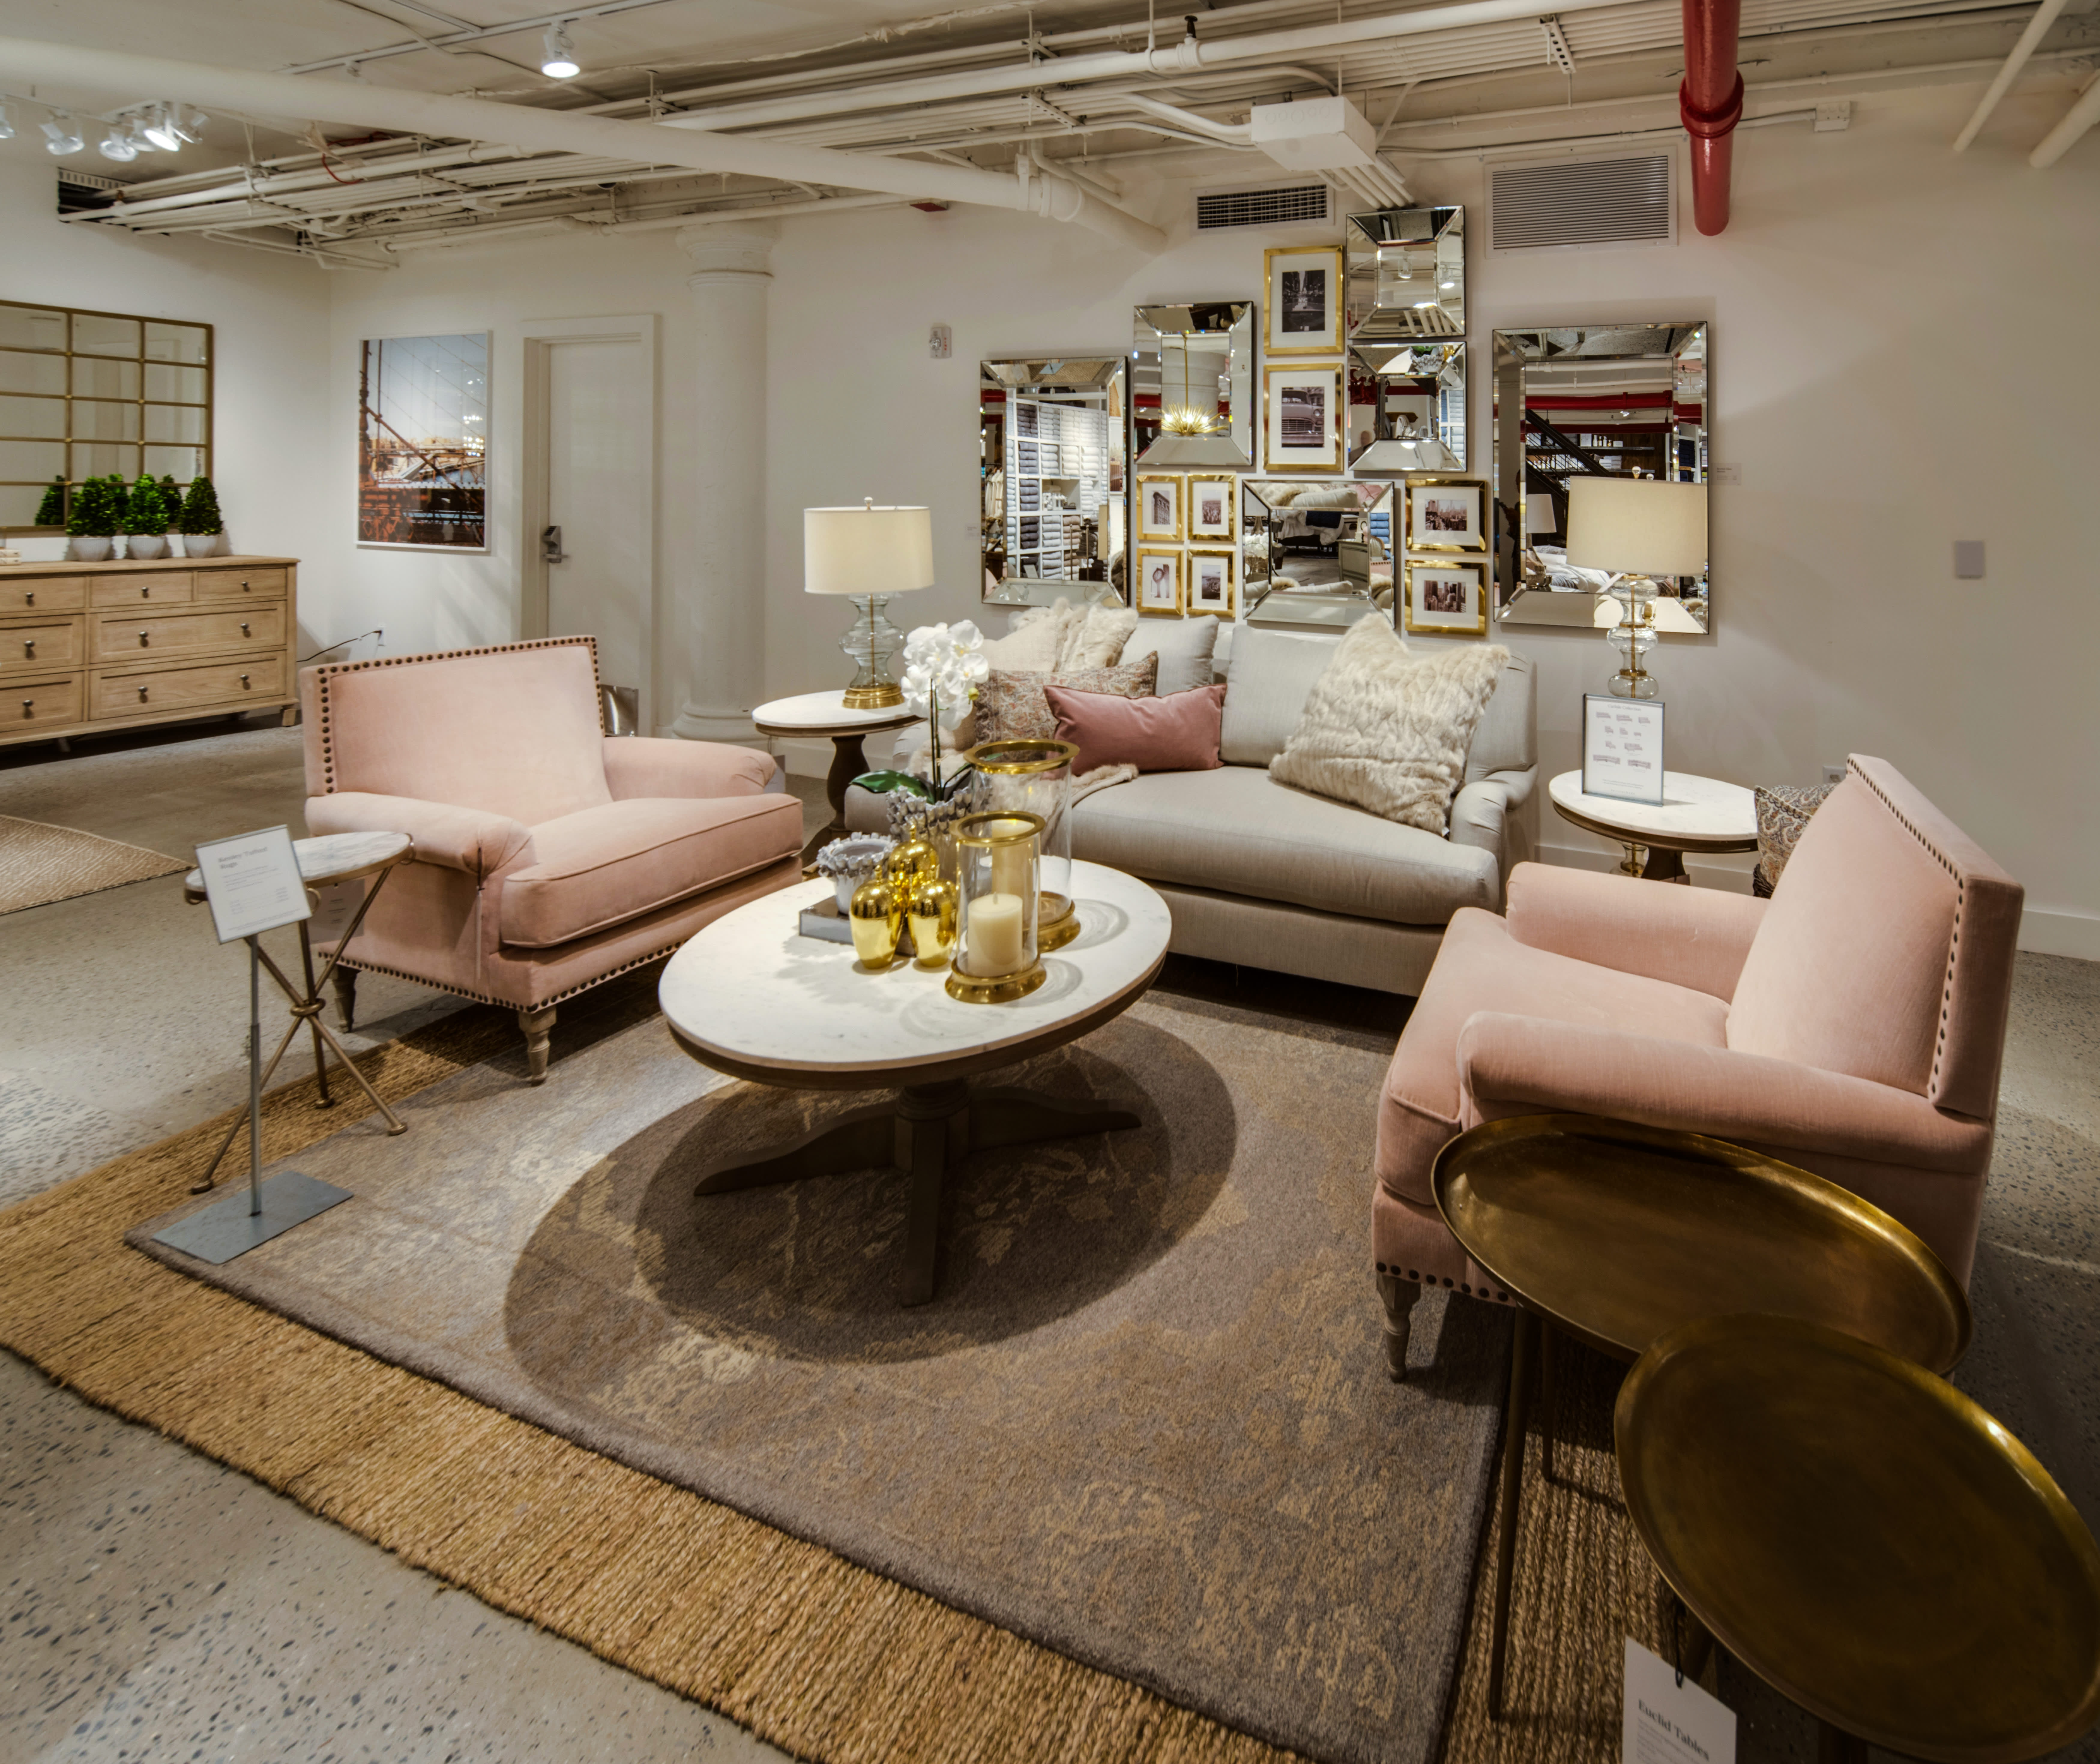 Pottery Barn – Home Decor Stores in NYC –  – New Yorker  Tips